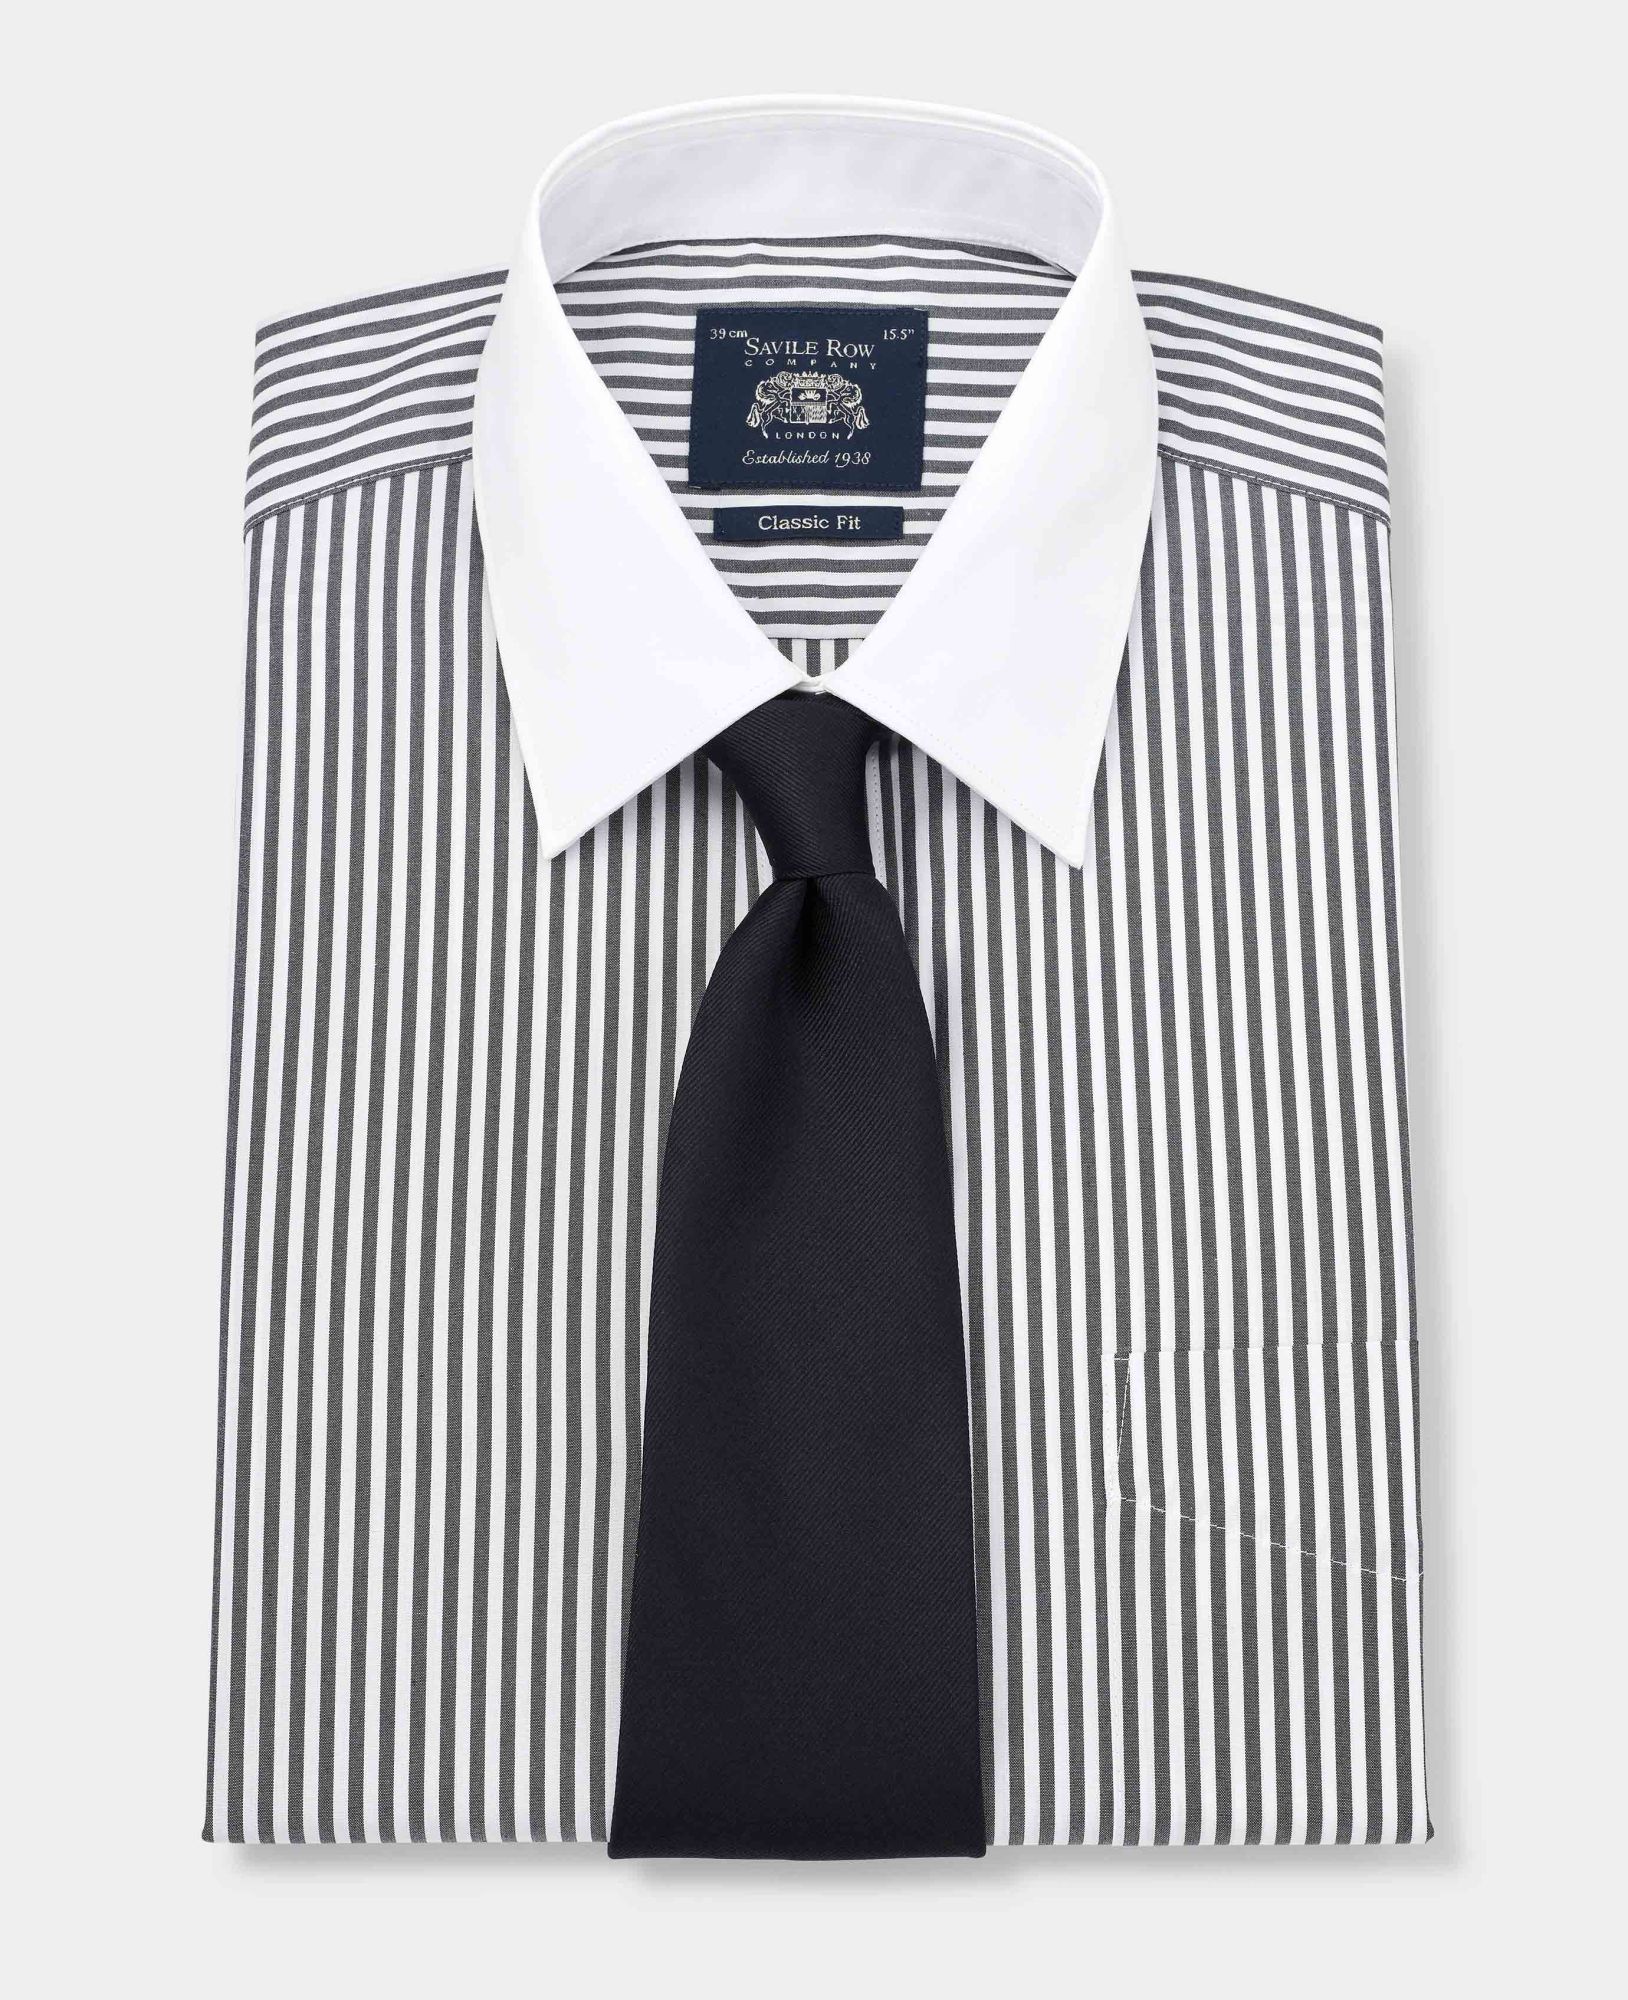 Black Stripe Classic Fit Contrast Collar Shirt With White Collar & Cuffs 16 1/2